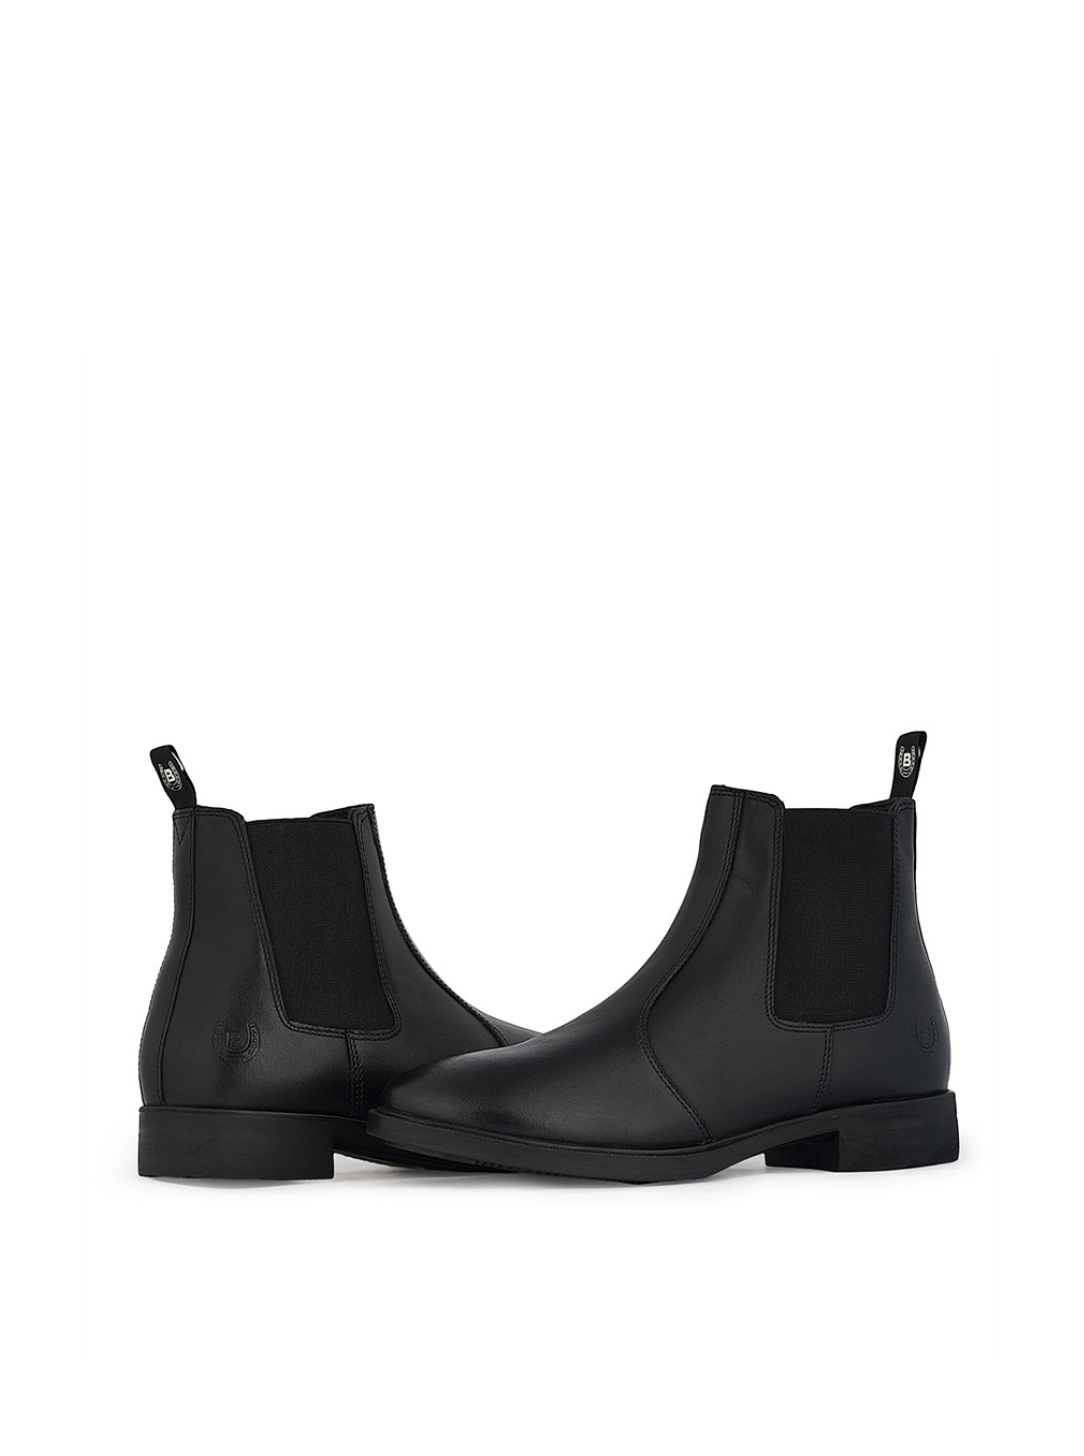 TENESSEE - Jodhpur boots, Ankle riding boots.